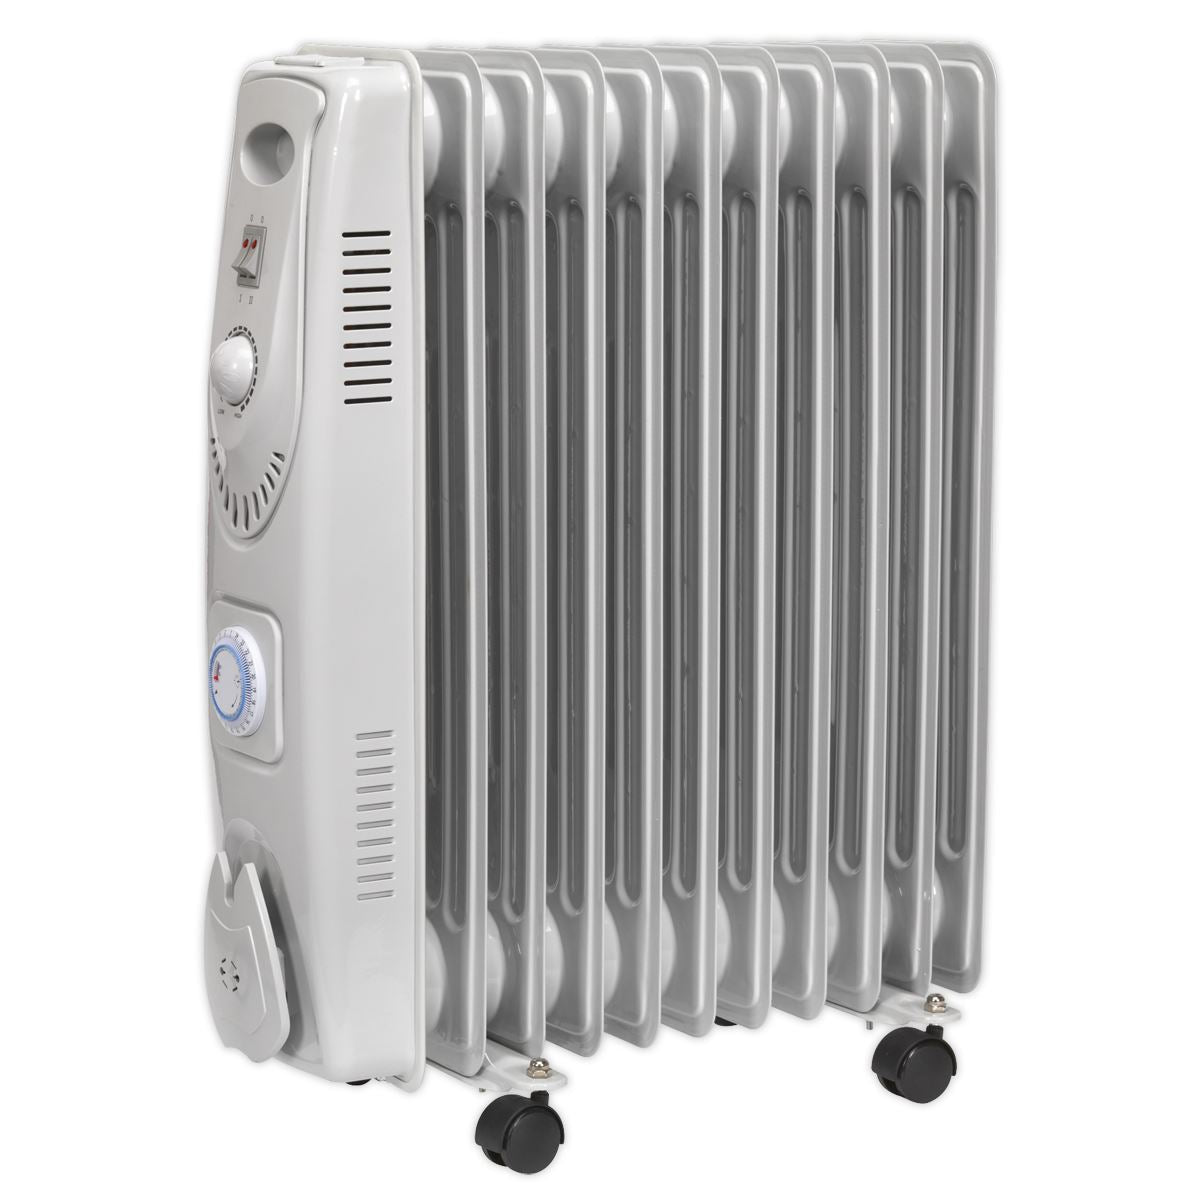 Sealey Oil Filled Radiator 2500W/230V 11-Element with Timer